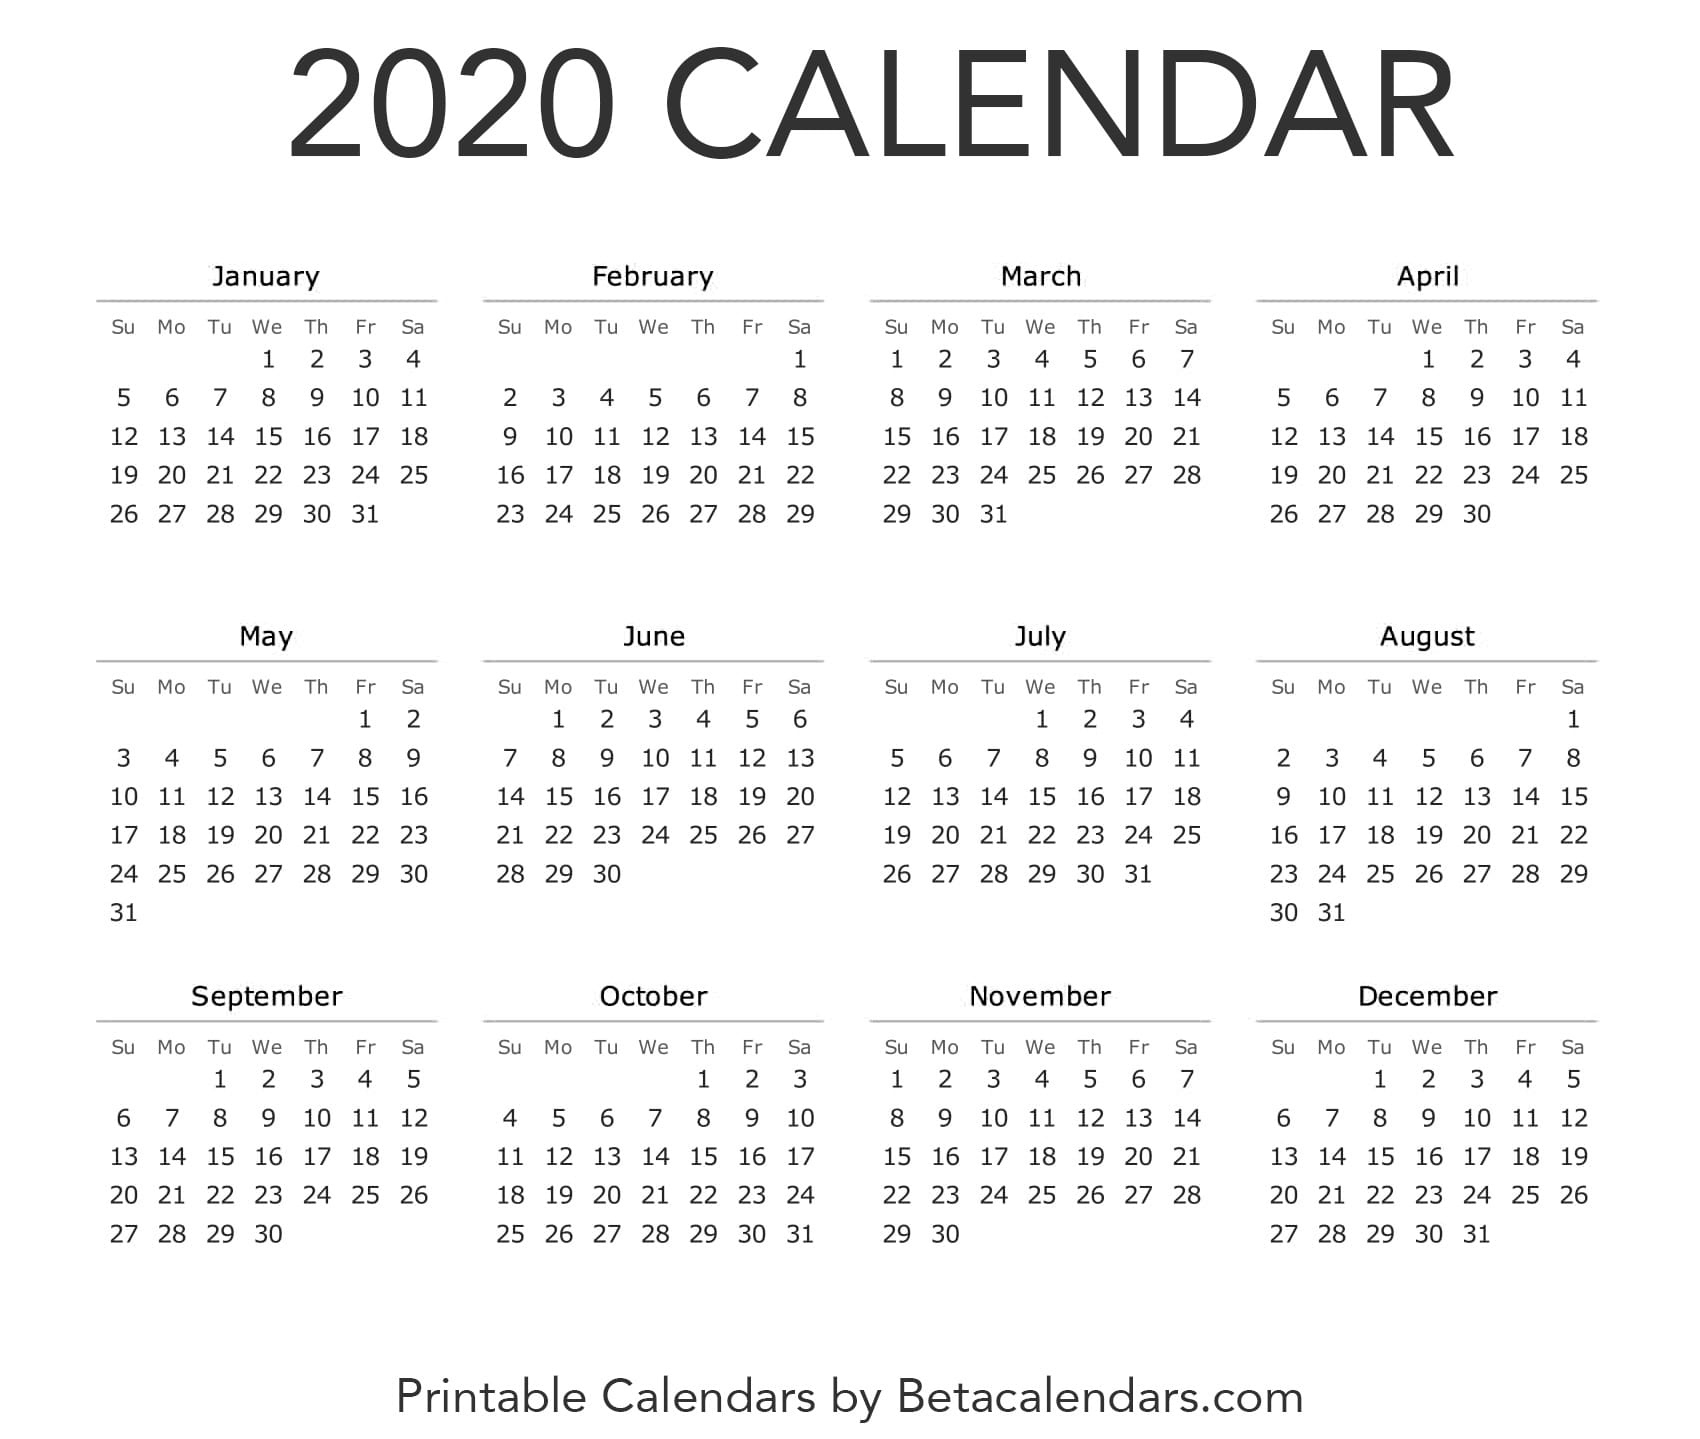 2020 Calendar - Free Printable Yearly Calendar 2020 Remarkable 2020 Calender With Luner Dates